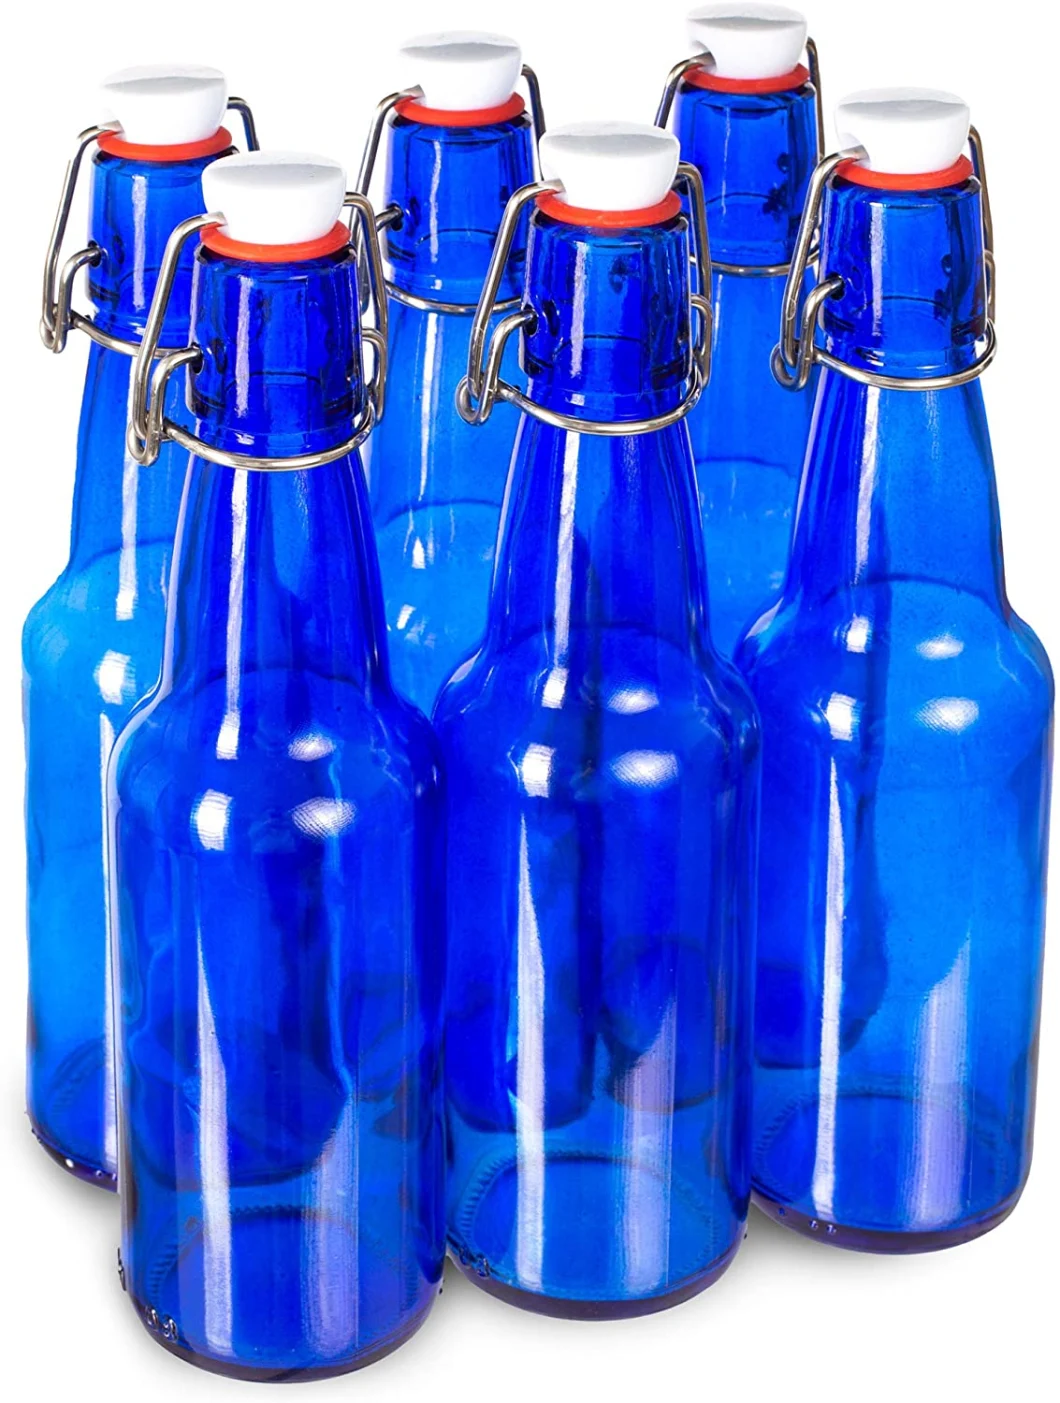 Blue Glass Grolsch Beer Bottles - Airtight Seal with Swing Top/Flip Top Stoppers